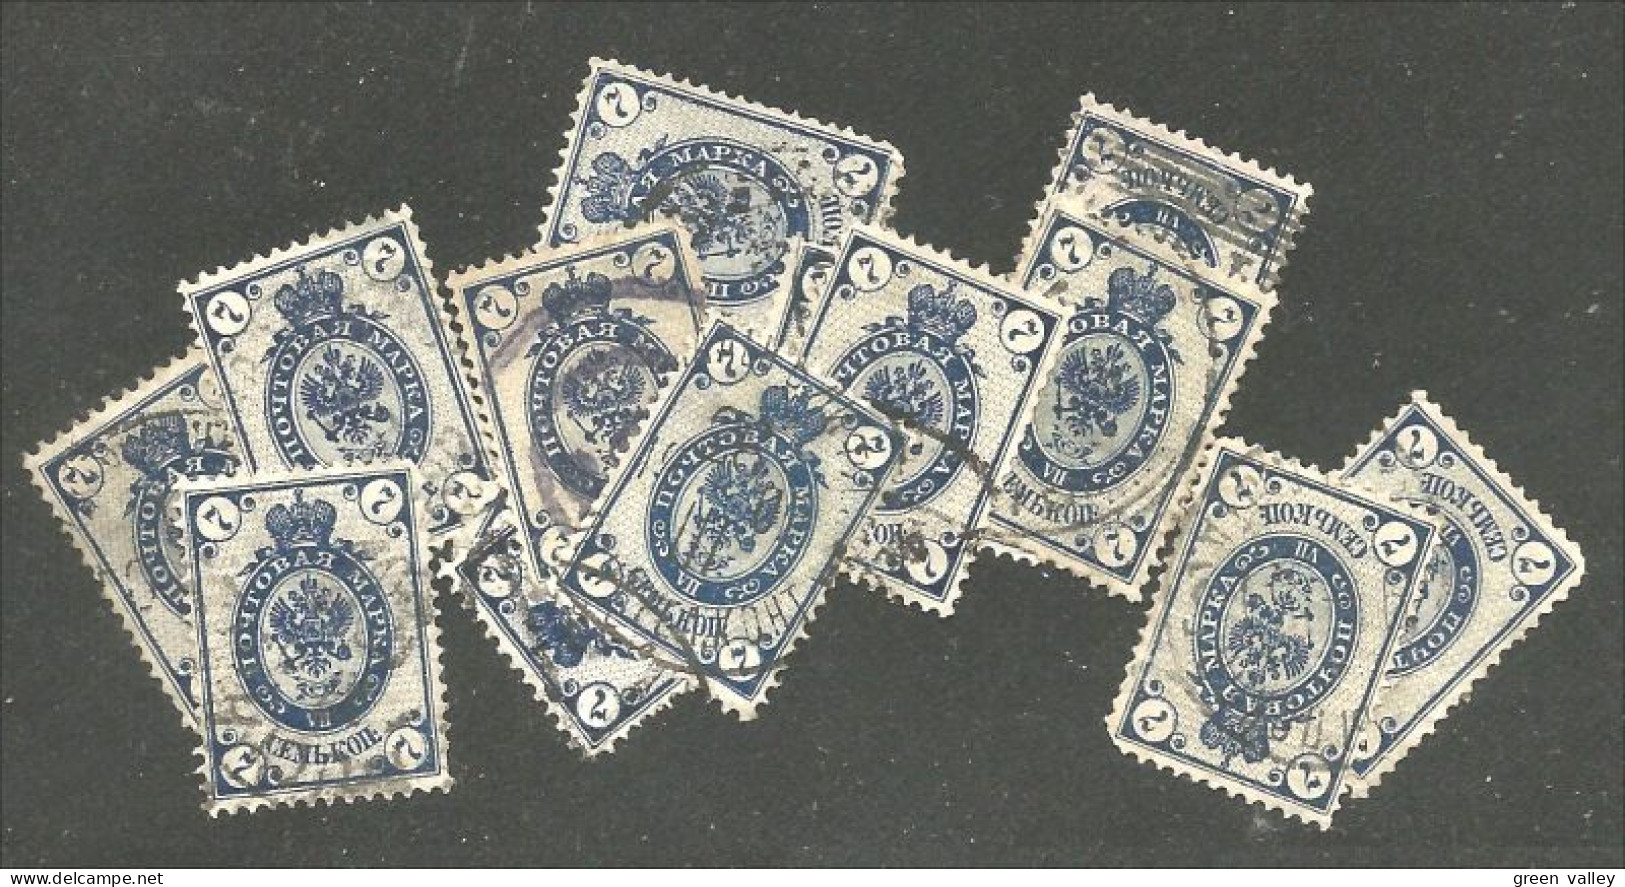 771 Russie 7k 1889 Blue 35+ Stamps For Study Aigle Imperial Eagle Post Horn Cor Postal (RUZ-341) - Used Stamps